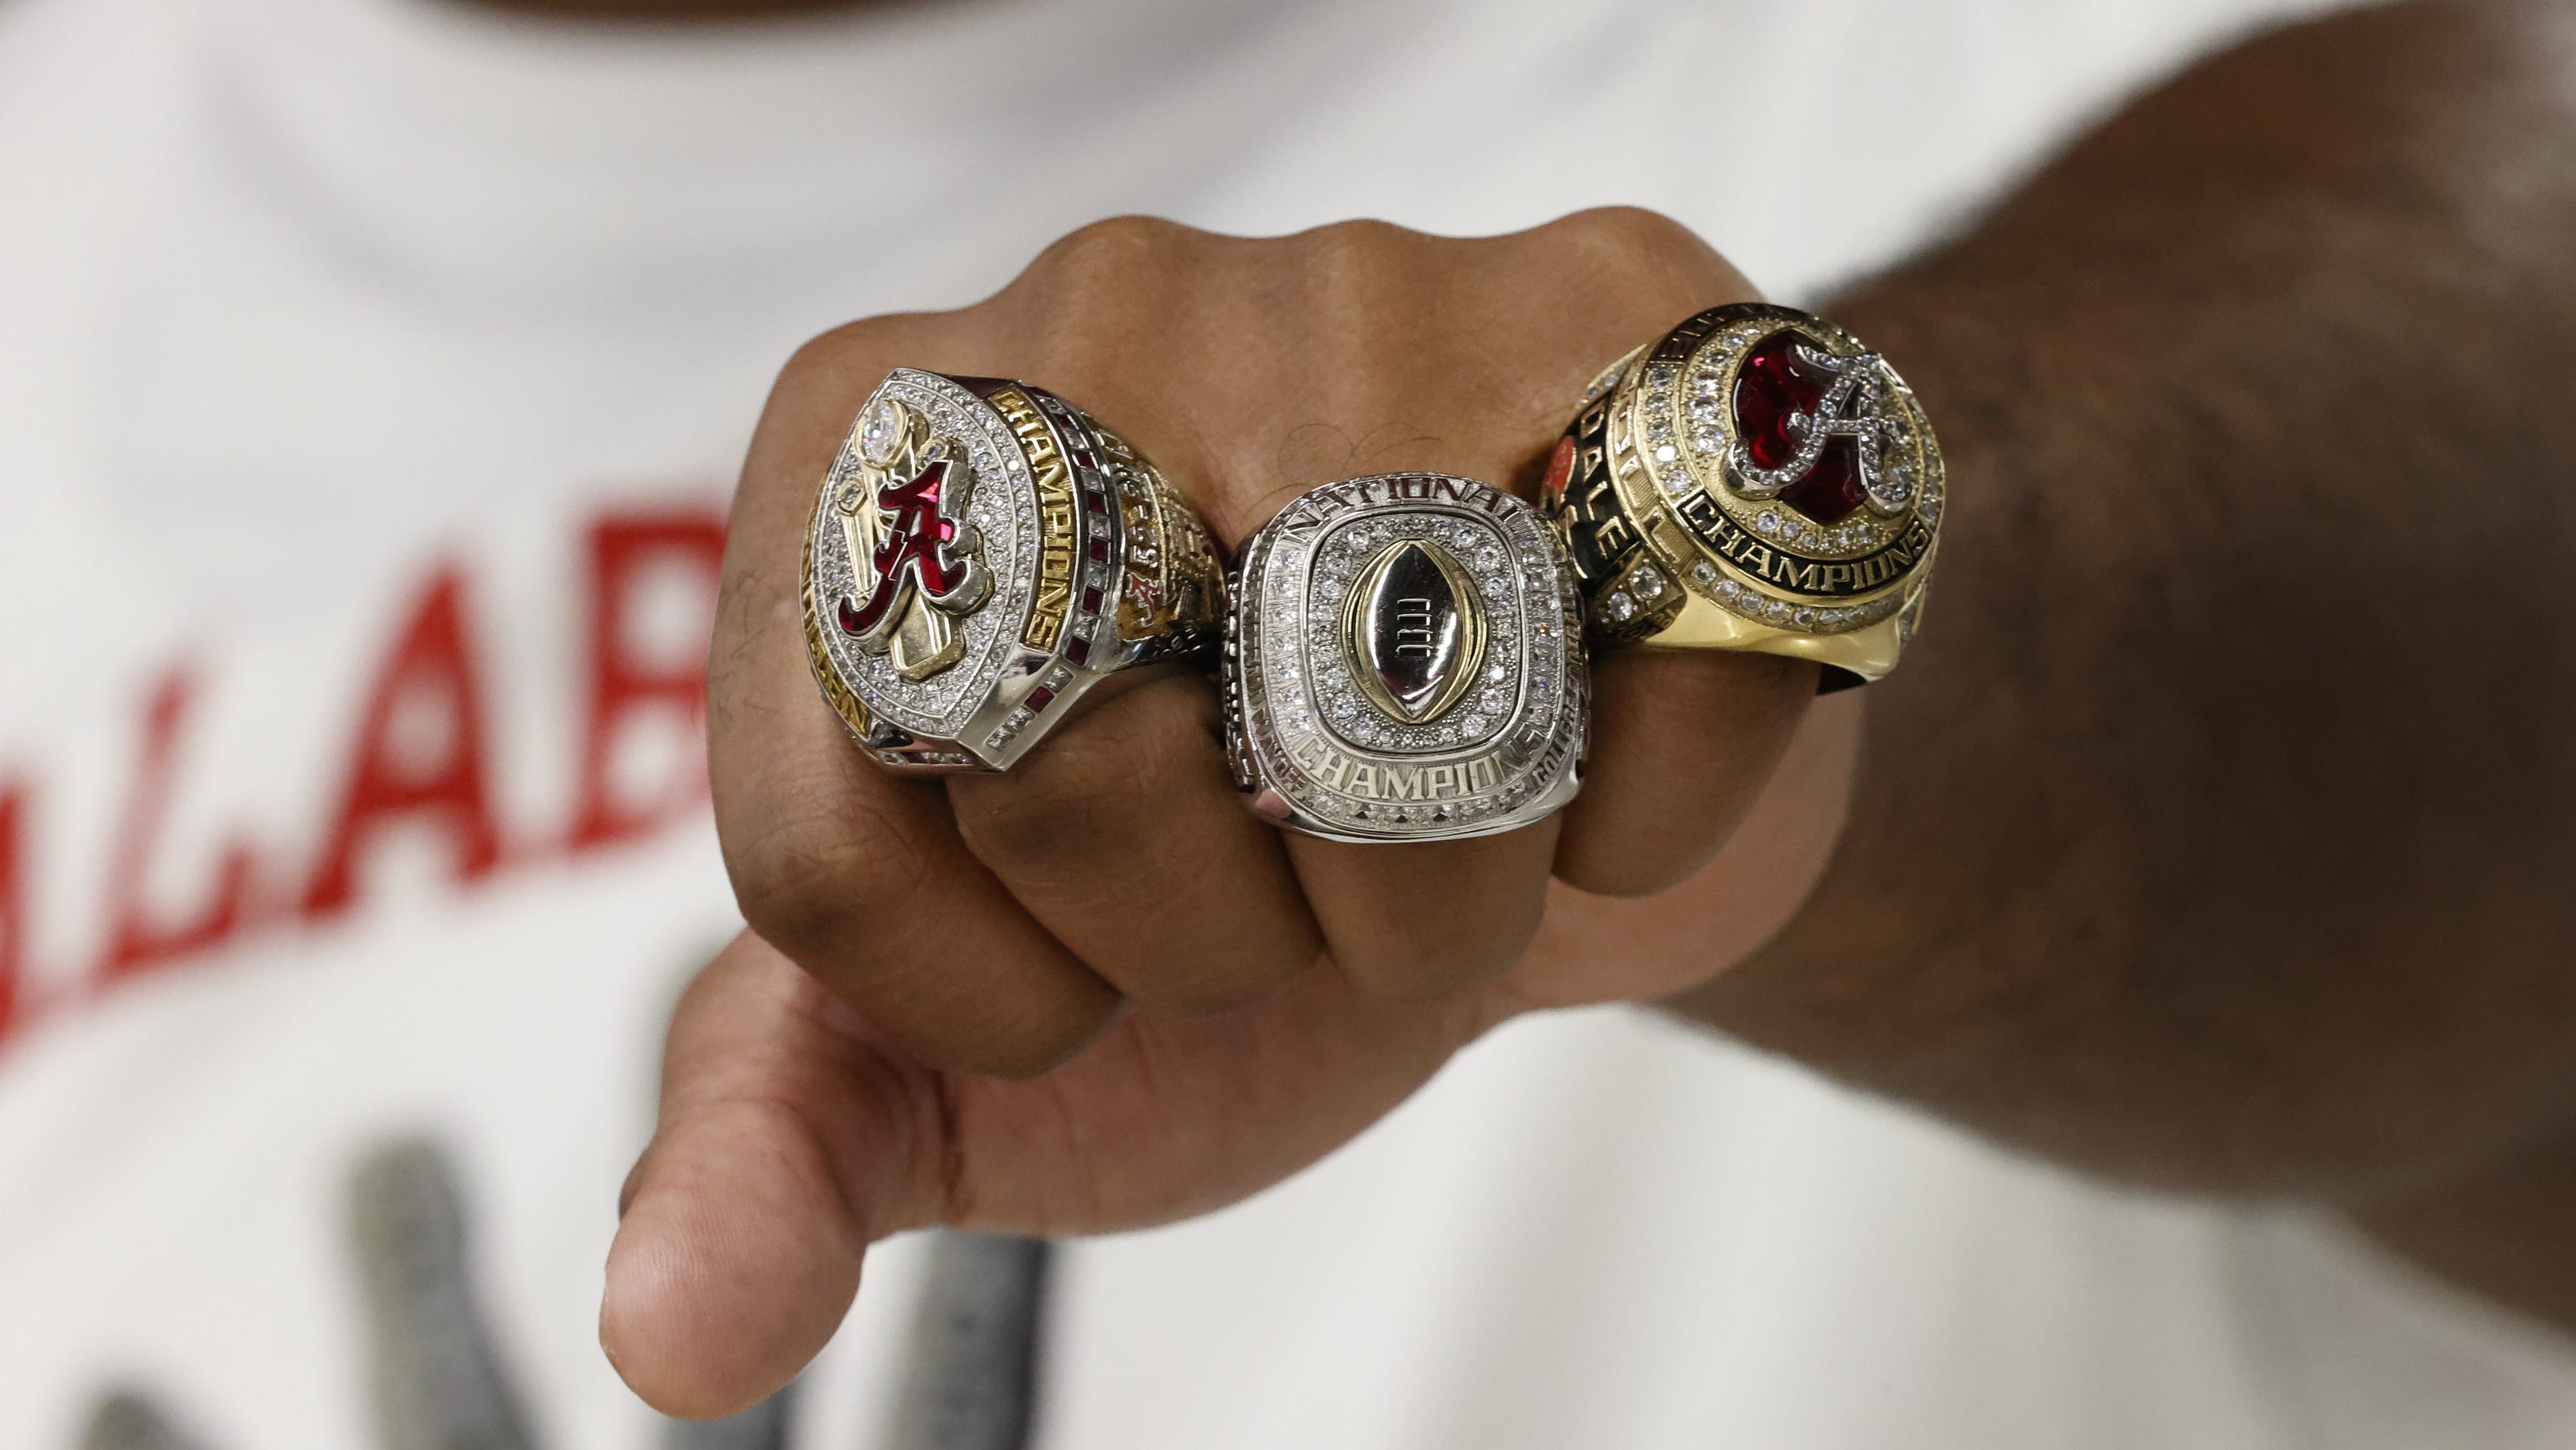 For Alabama football: Steak and beans and championship rings